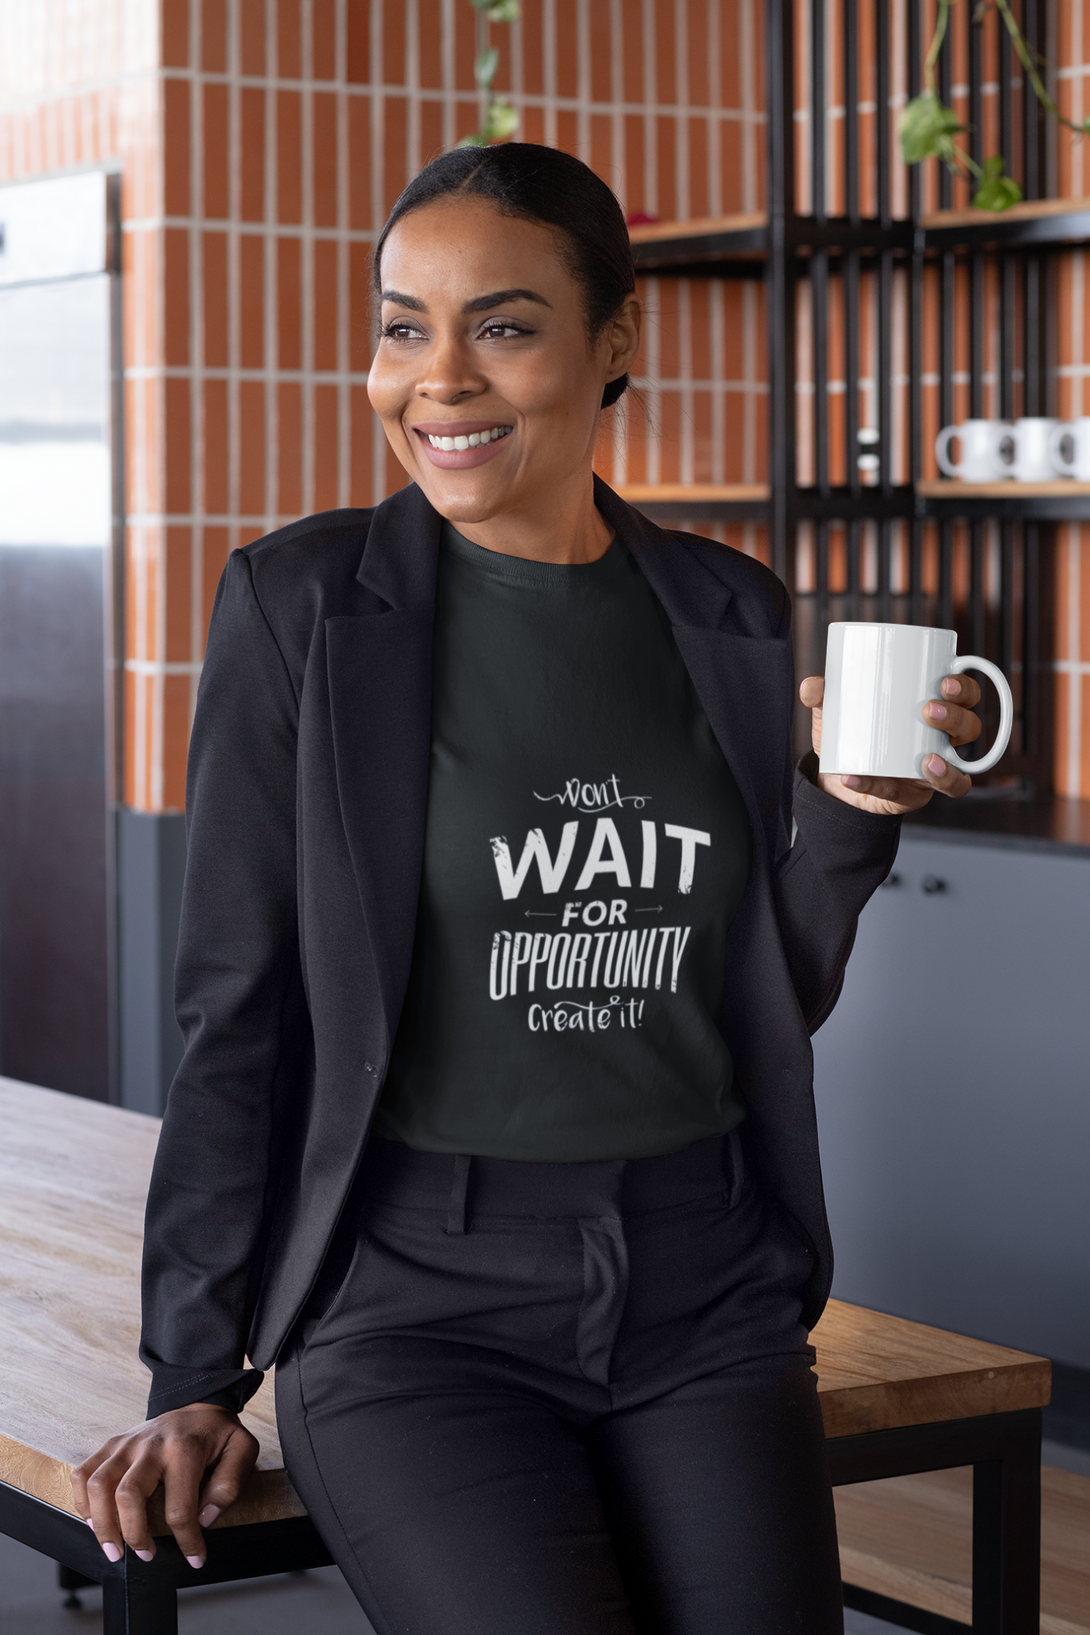 Create Opportunity Printed T-Shirt For Women - WowWaves - 4